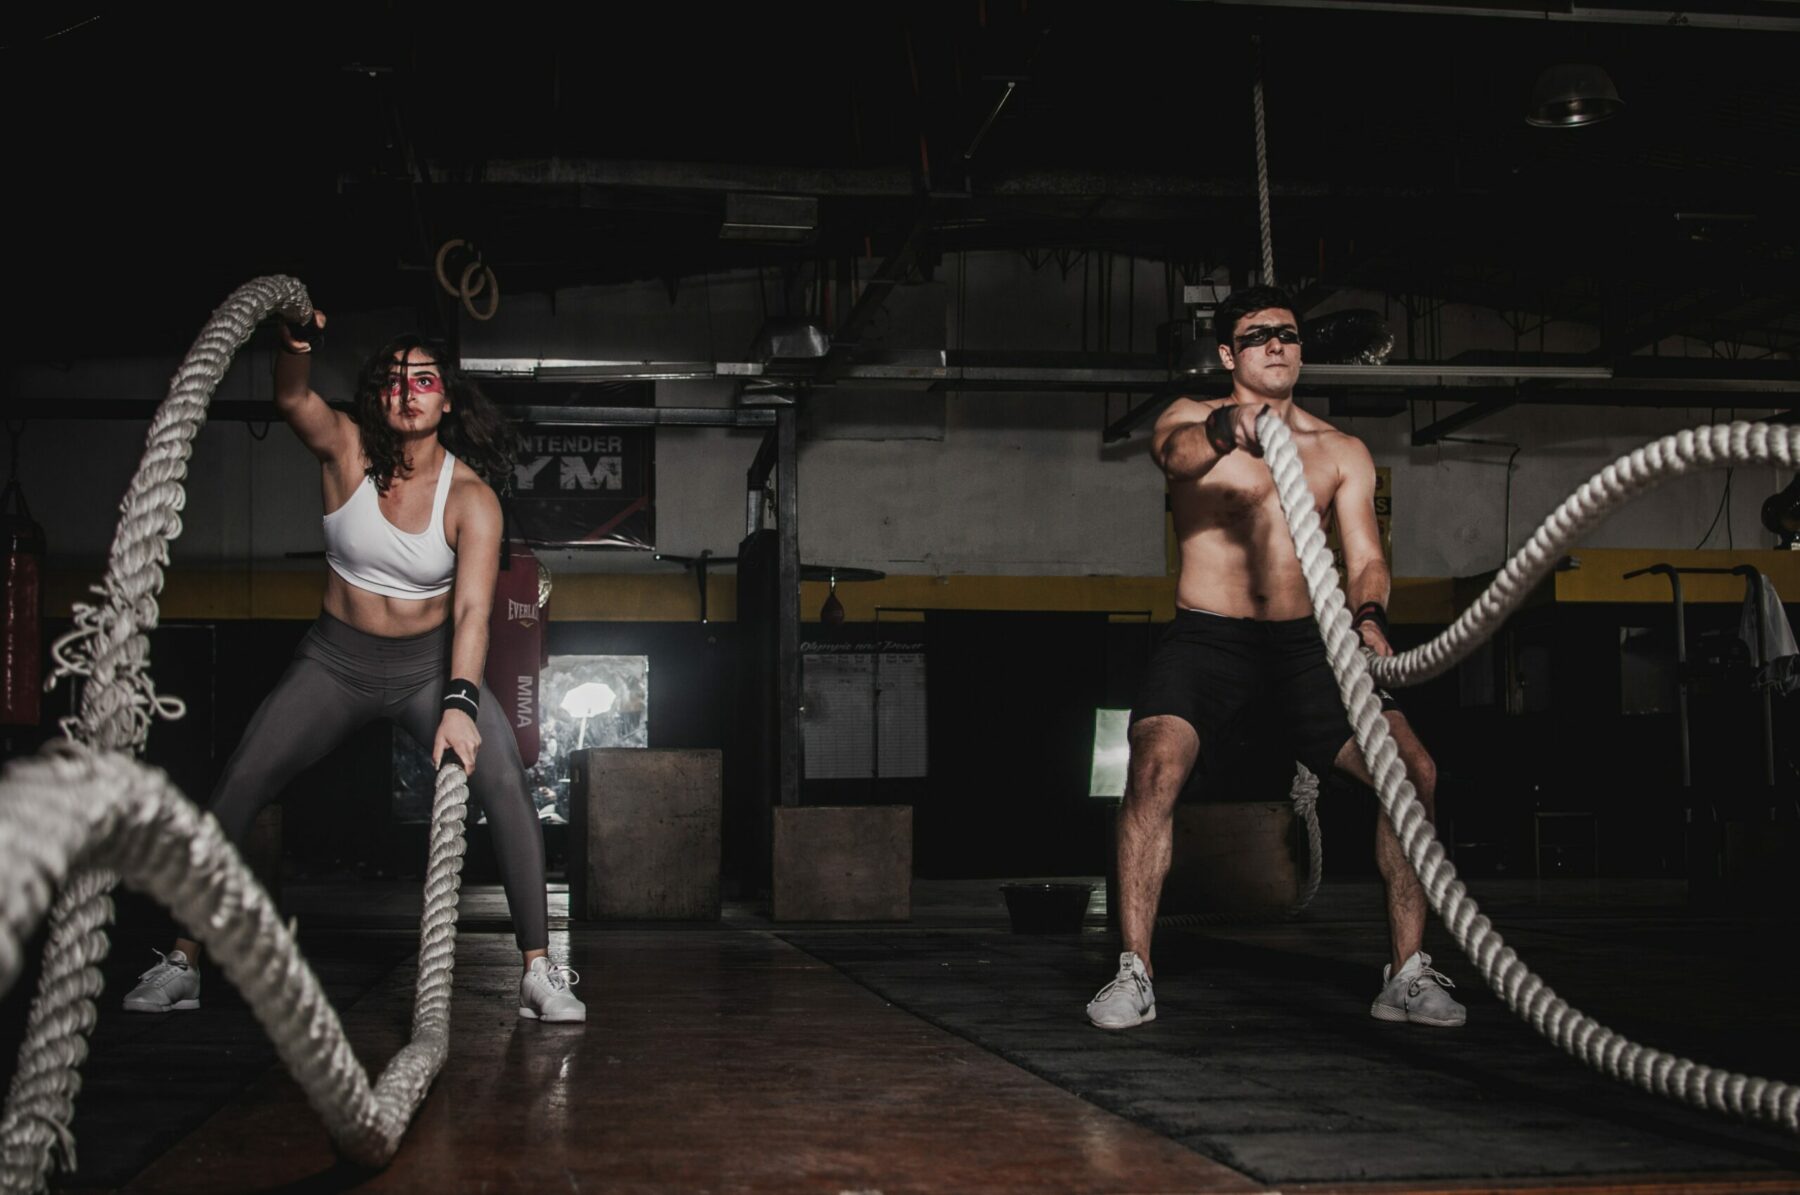 Man and woman using battle ropes.